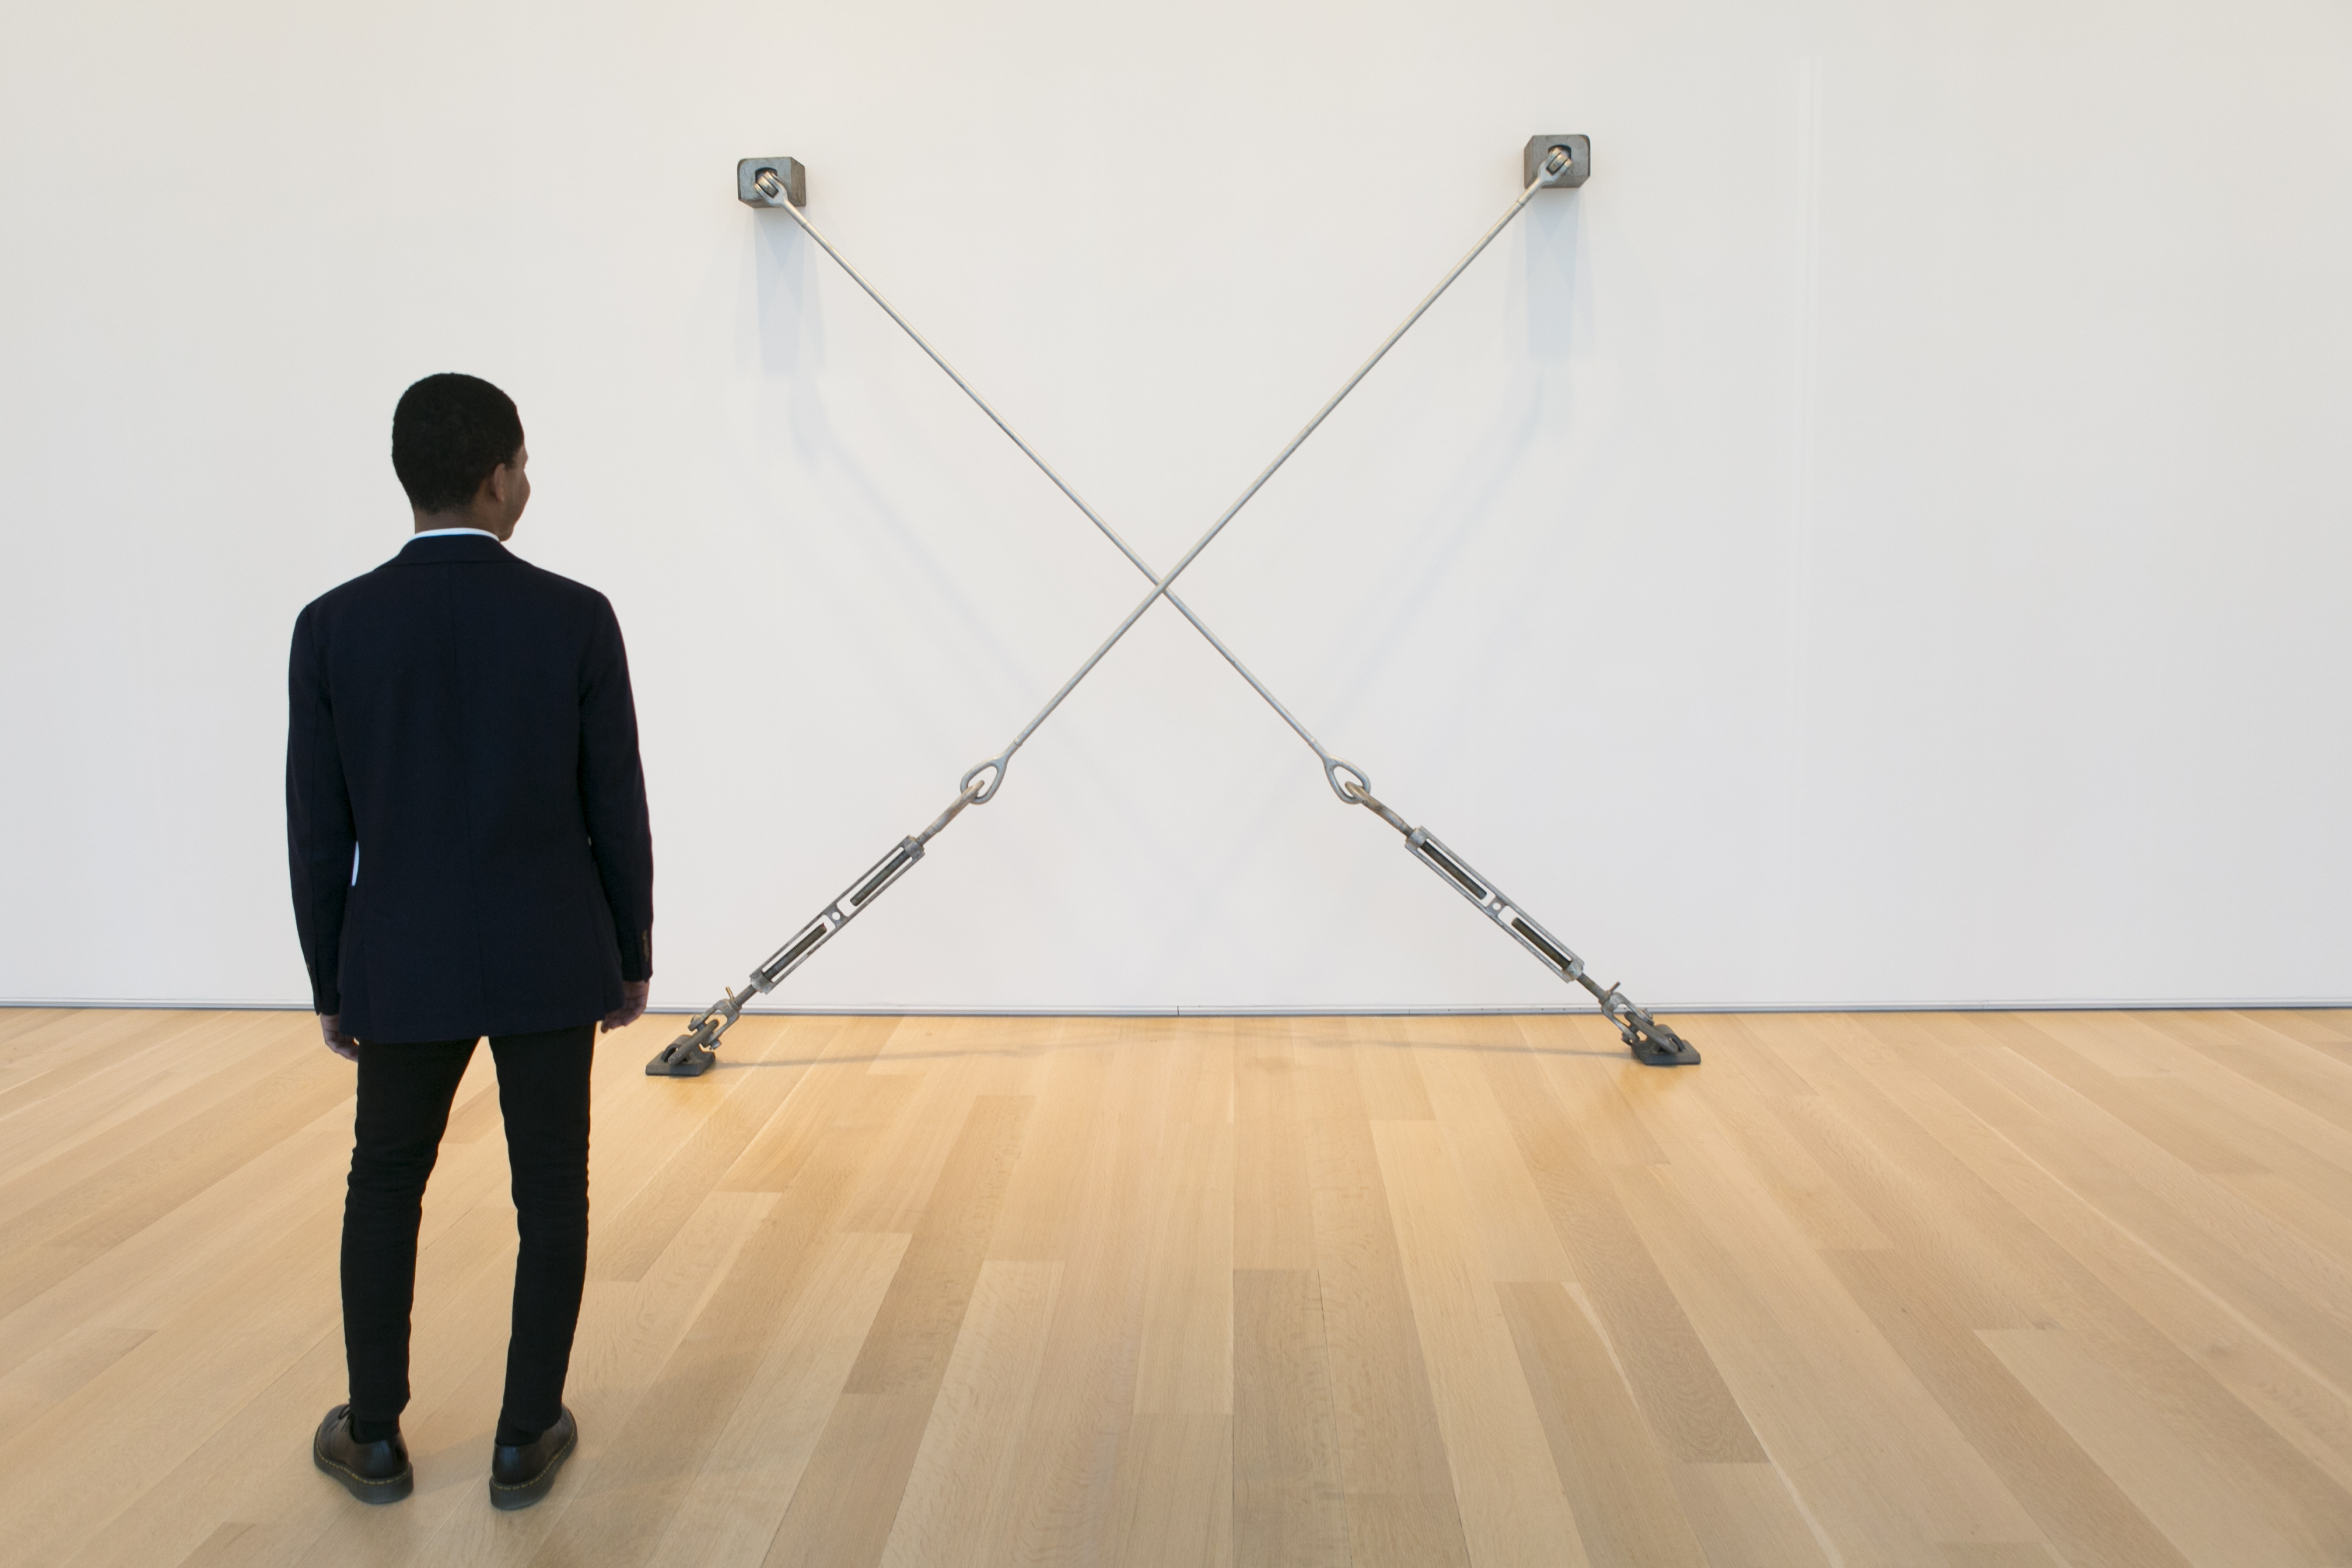 A person views an artwork that uses metal container lashing bars hung installed on a white wall and a wooden floor.